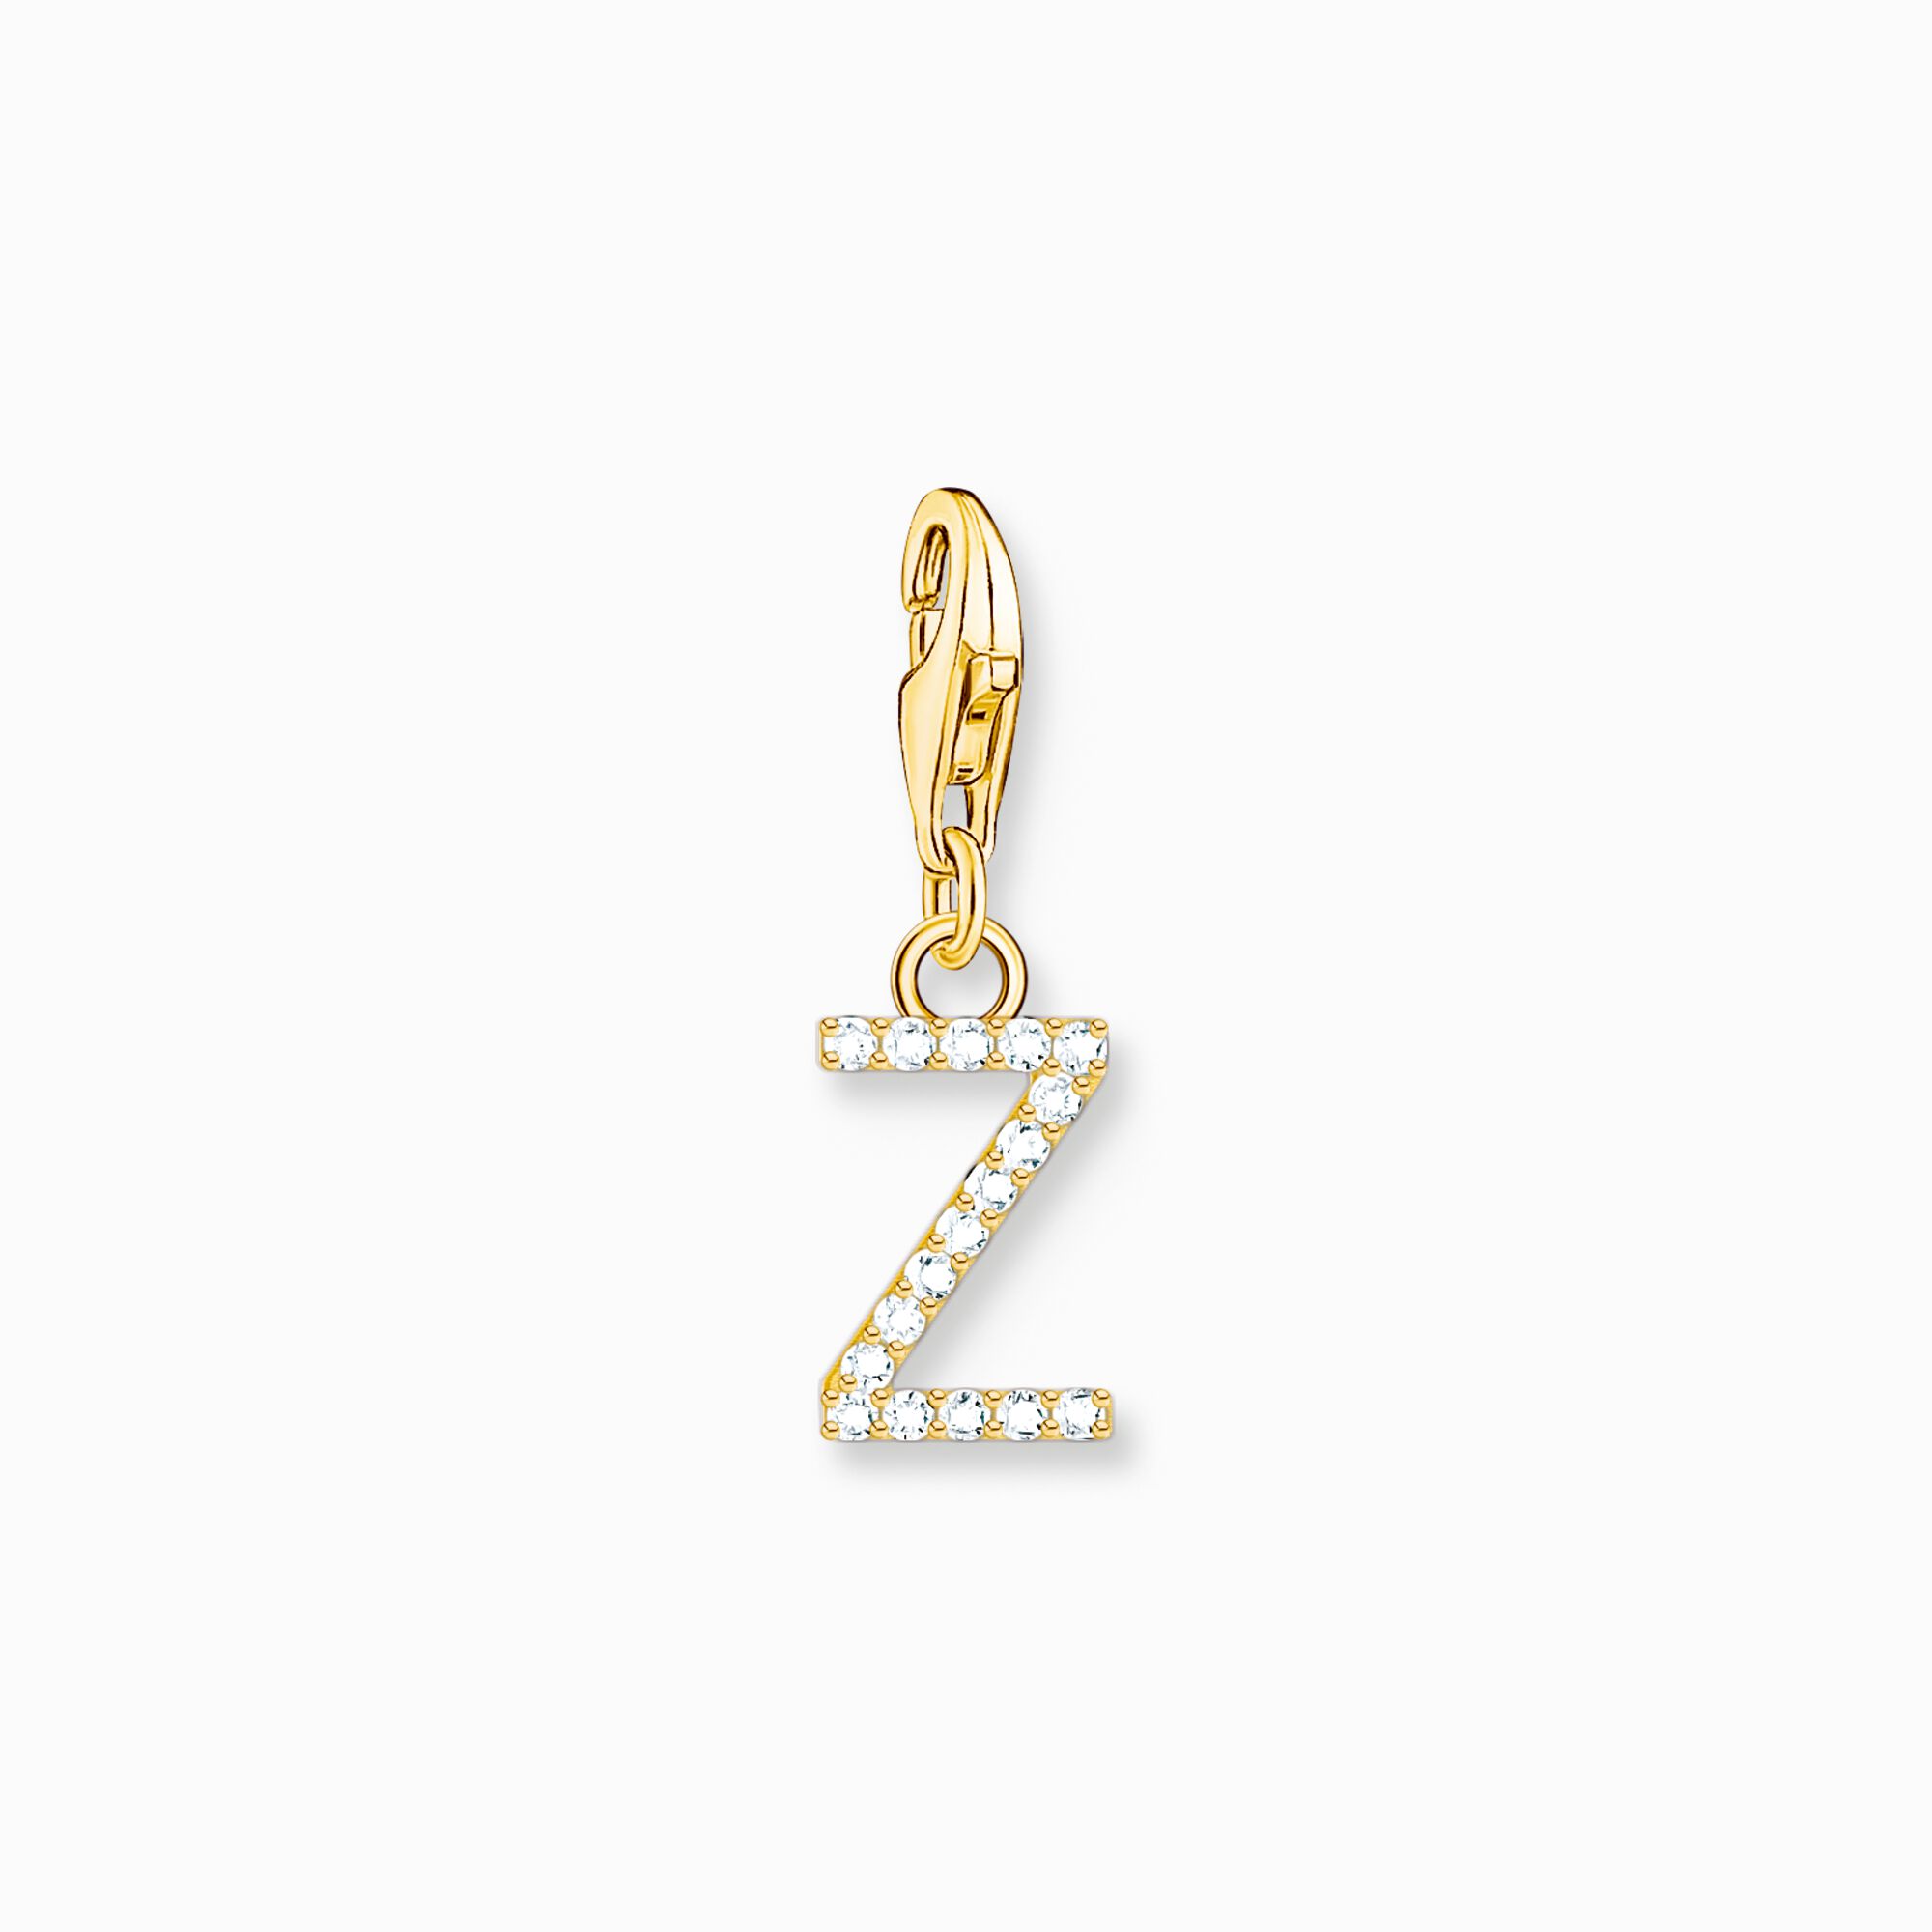 Charm pendant letter Z with white stones gold plated from the Charm Club collection in the THOMAS SABO online store